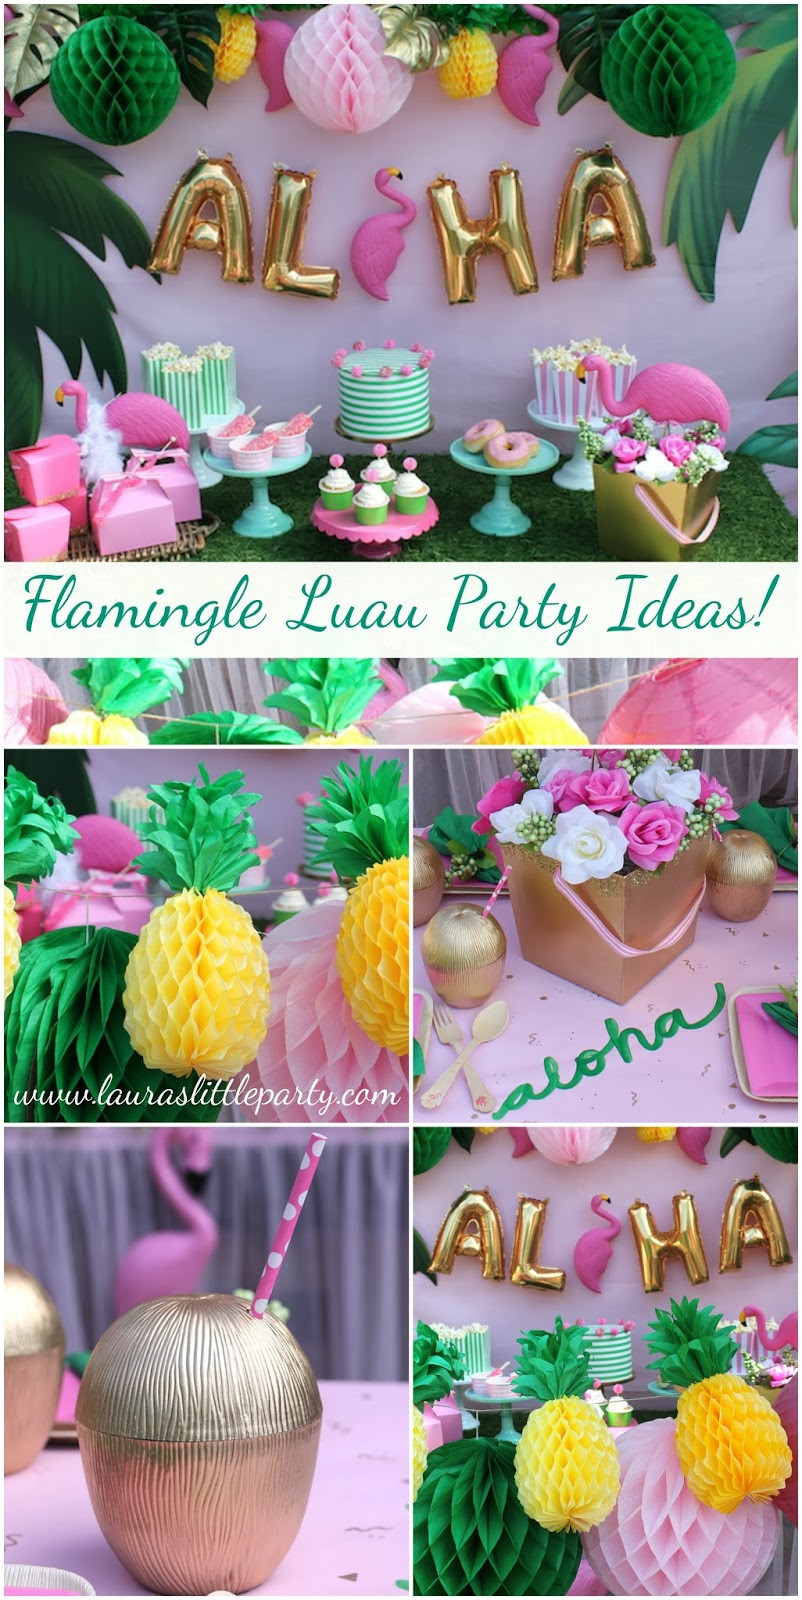 Summer Themed Party Ideas
 Let s Flamingle Luau Summer Party Ideas LAURA S little